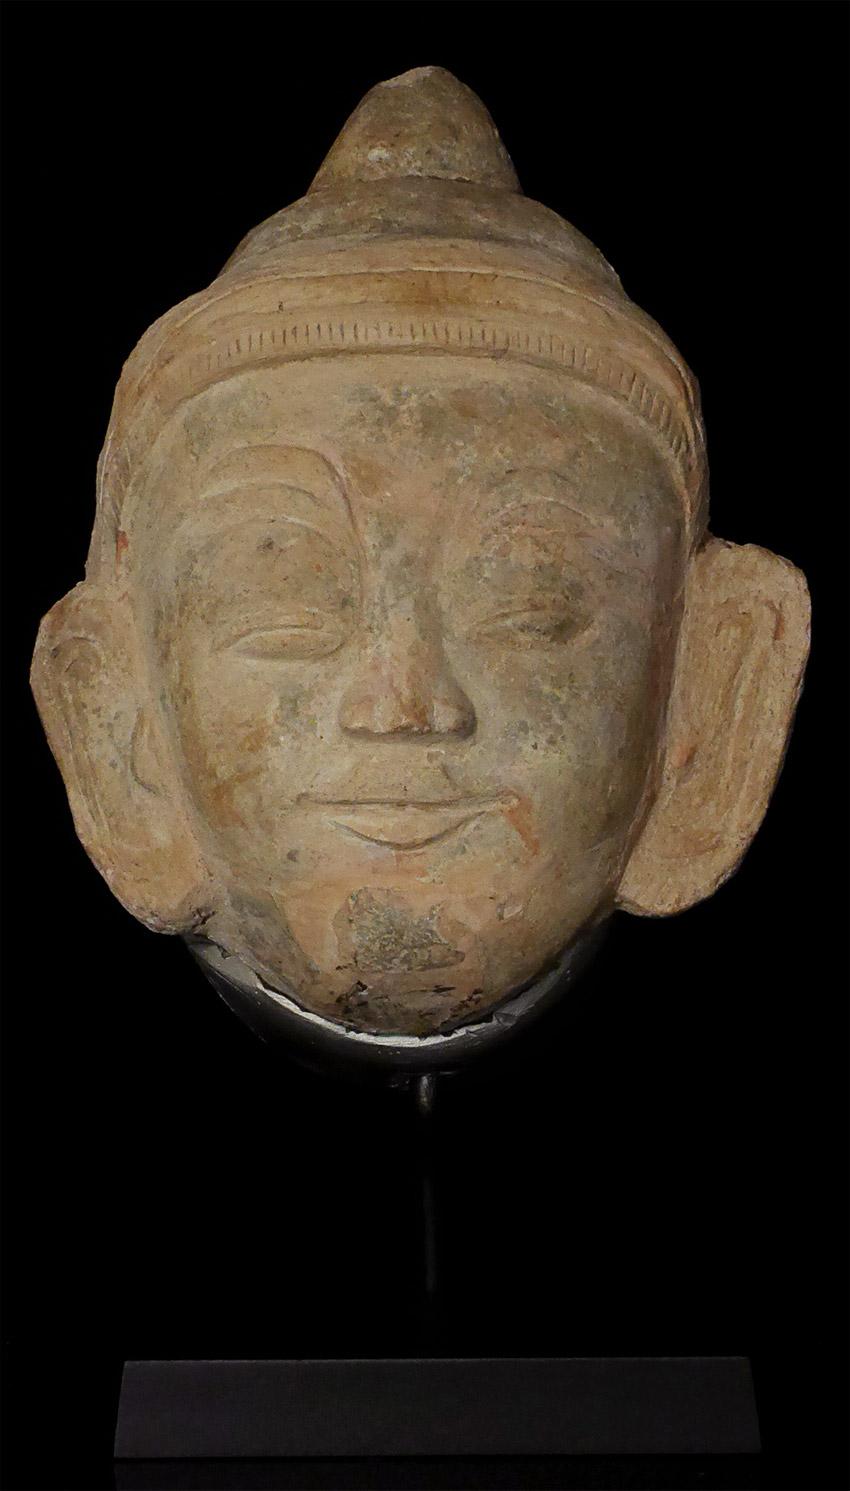 16thC Massive Burmese Ava Buddha Face Made of Stucco and Ancient Bricks, 8031 In Good Condition For Sale In Ukiah, CA